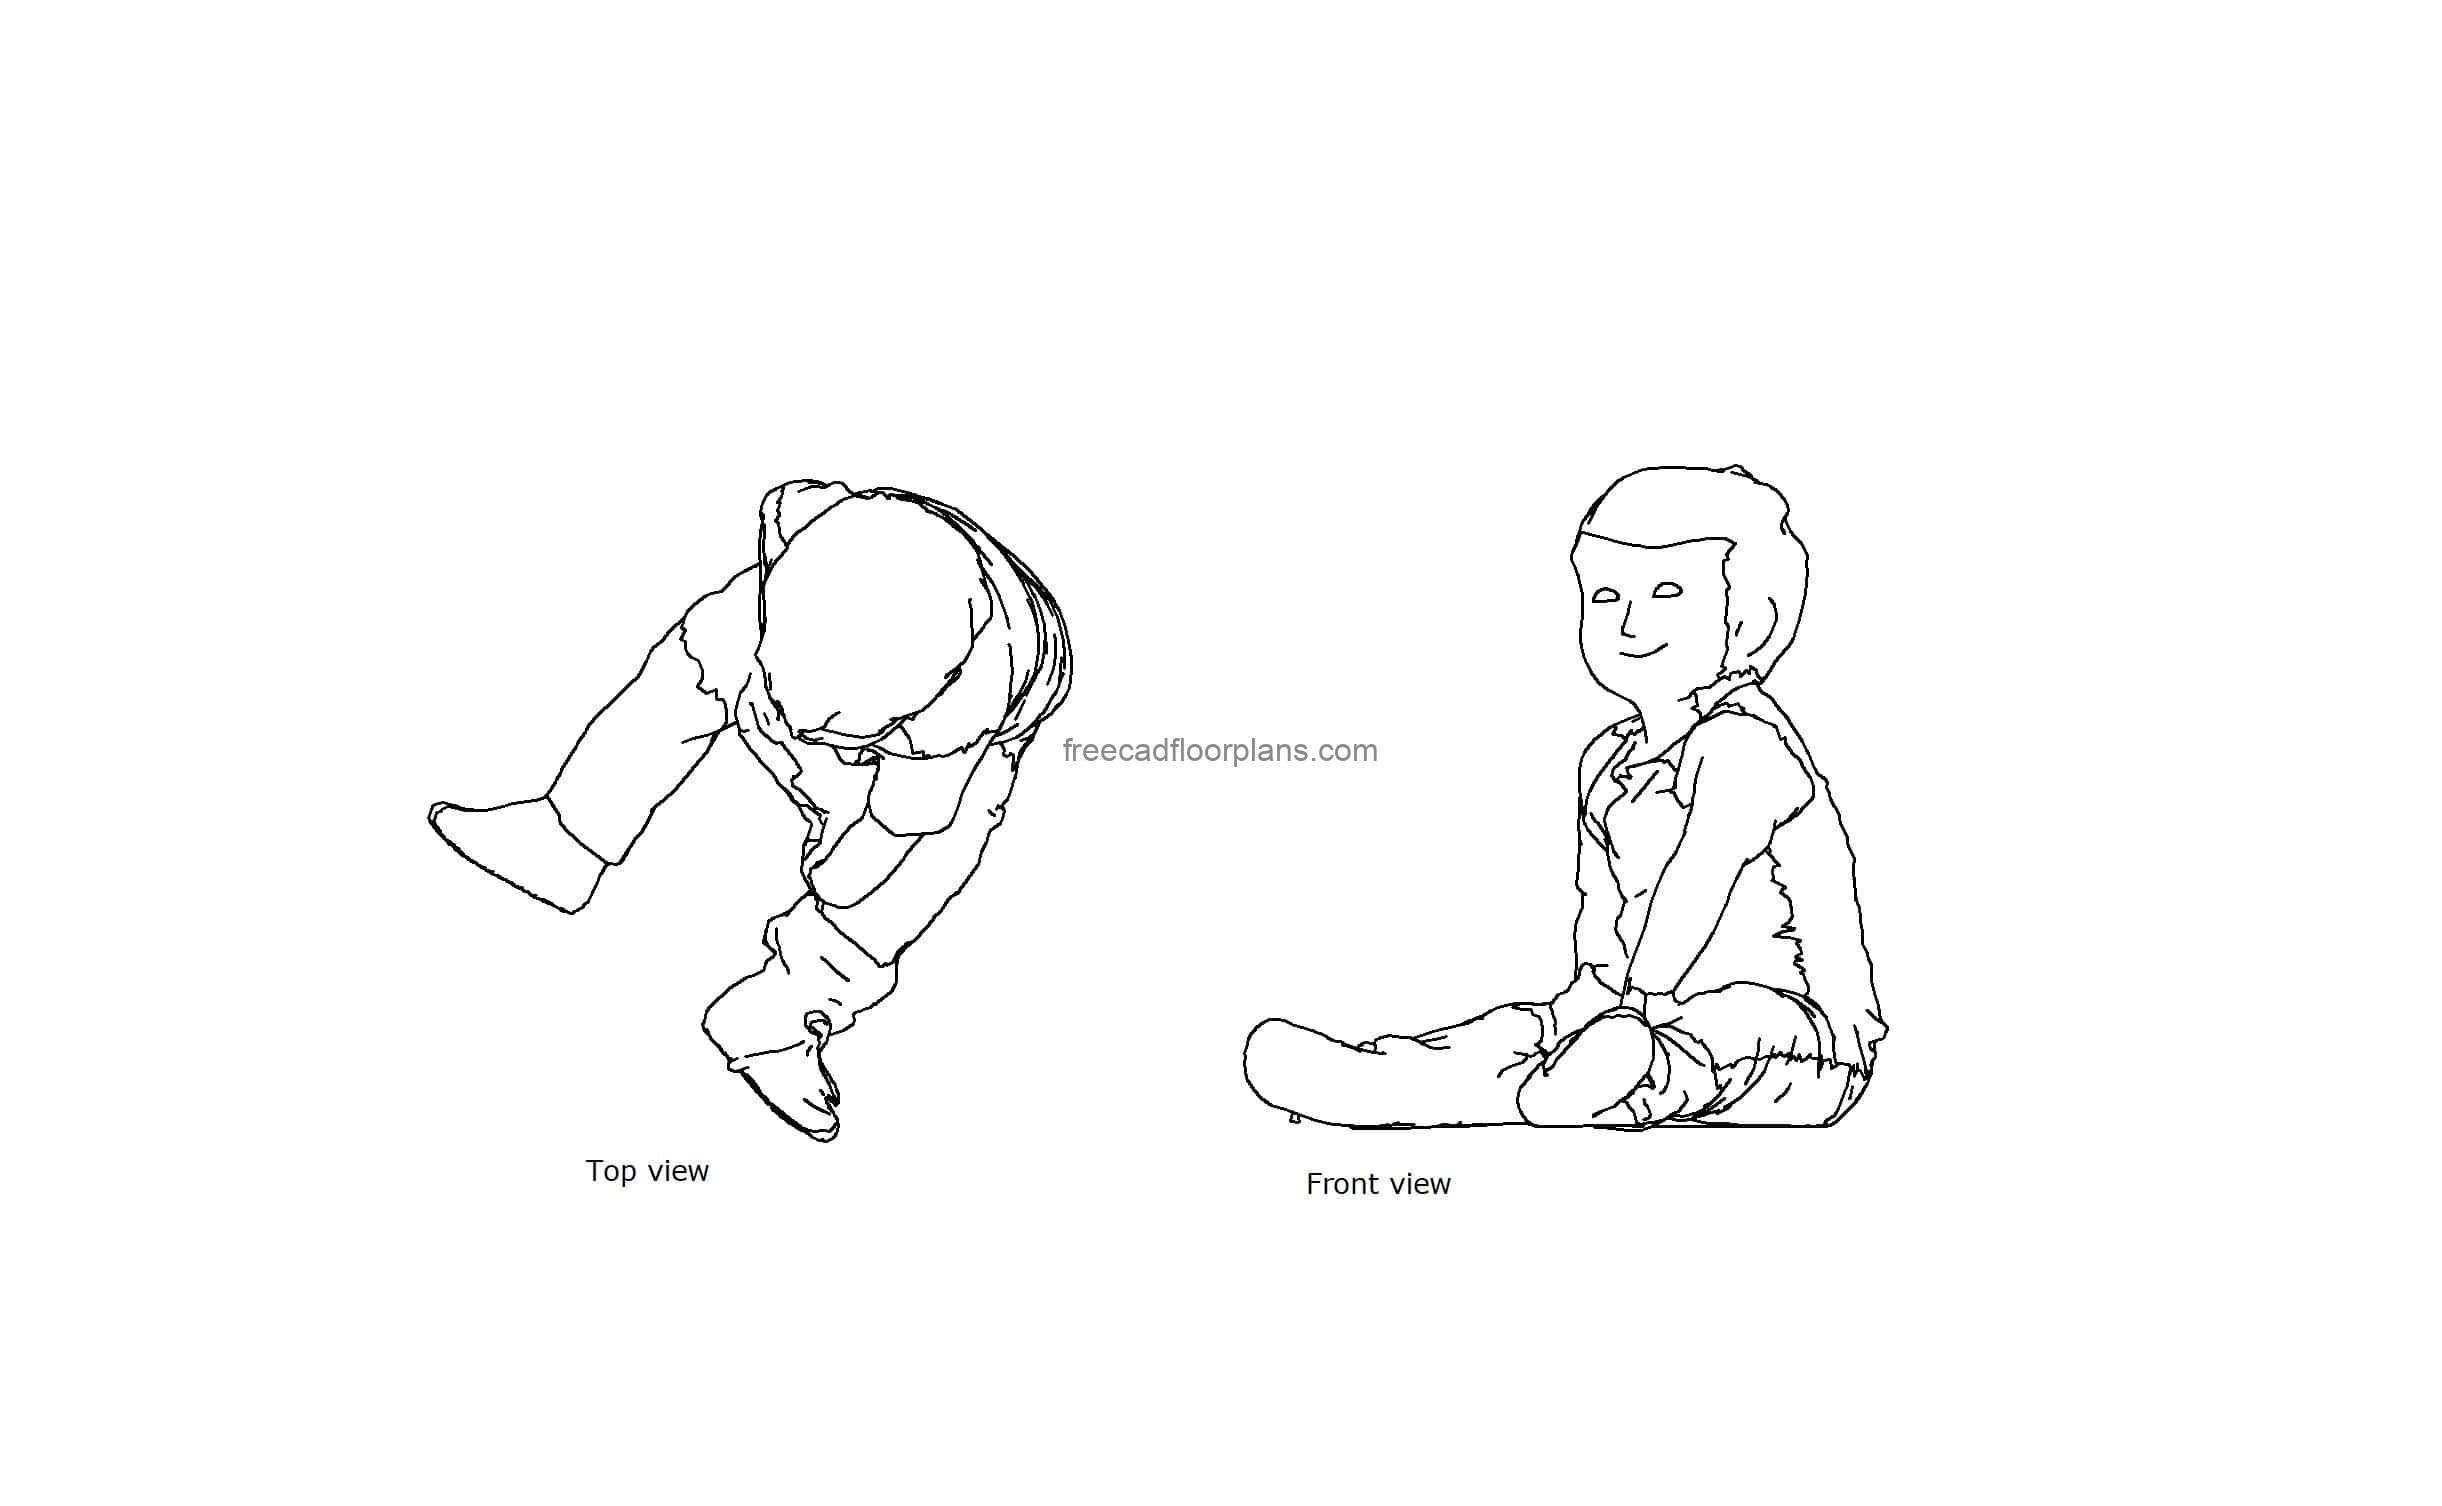 autocad drawing of a seated children, 2d plan and elevation views, dwg file free for download